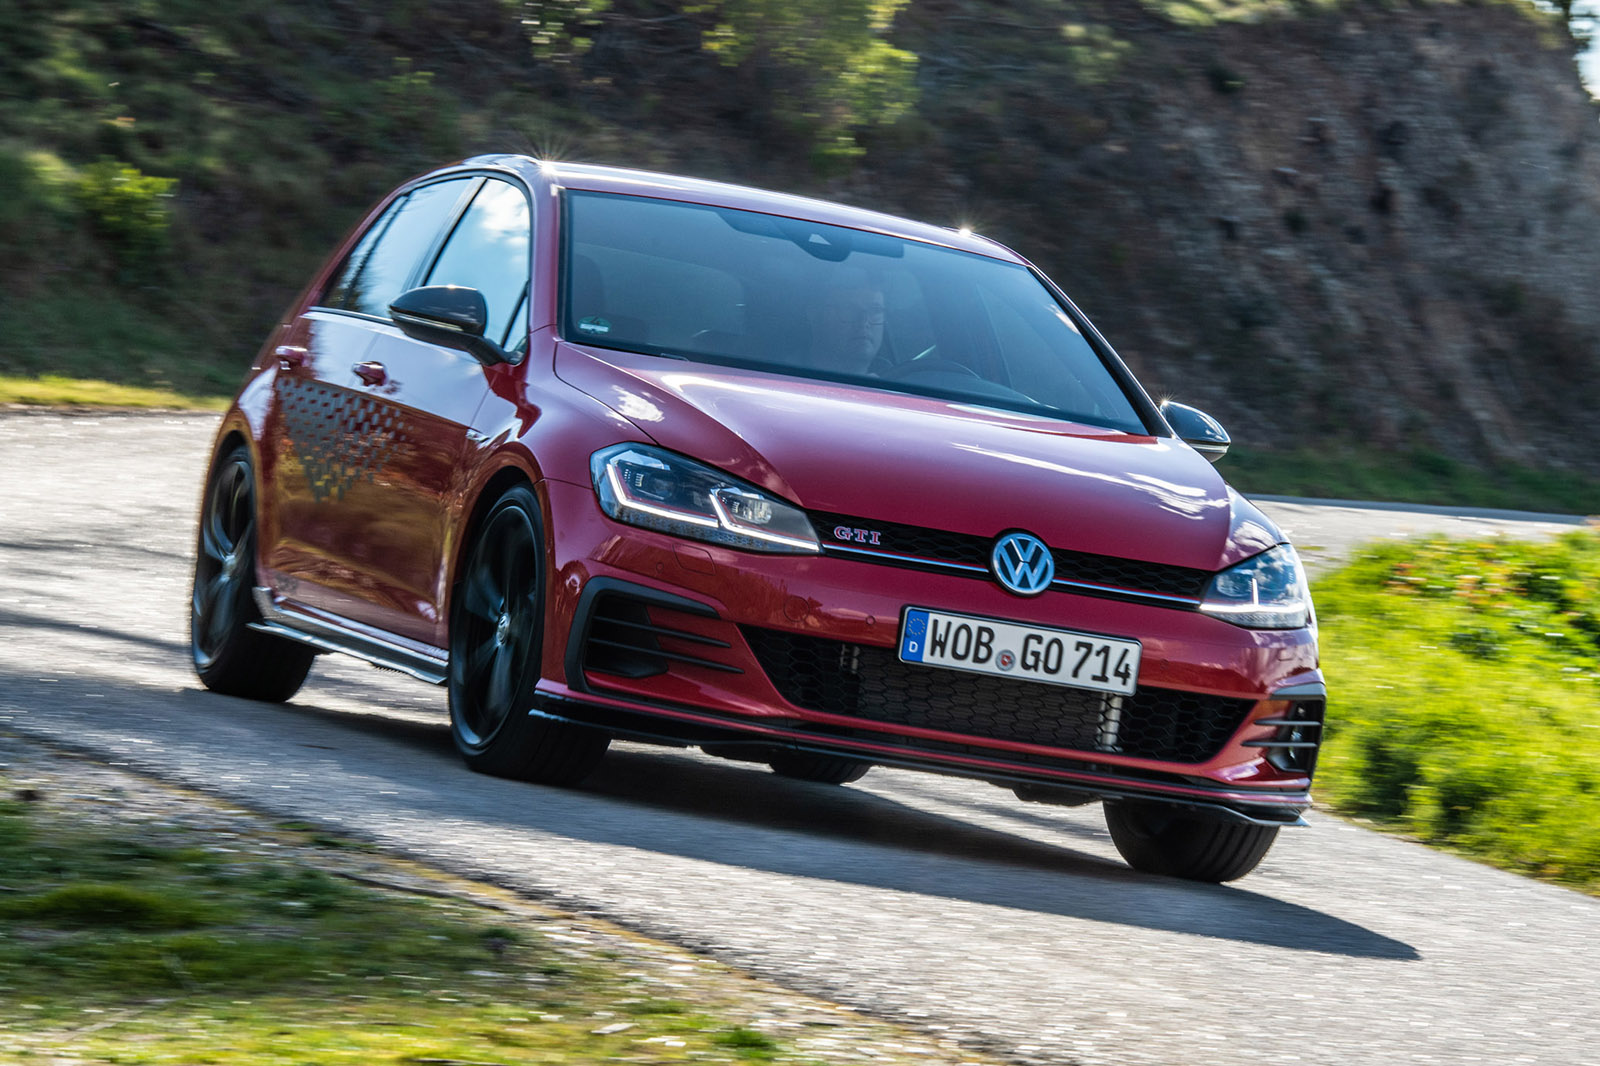 Volkswagen Golf Gti Tcr Review 21 Autocar